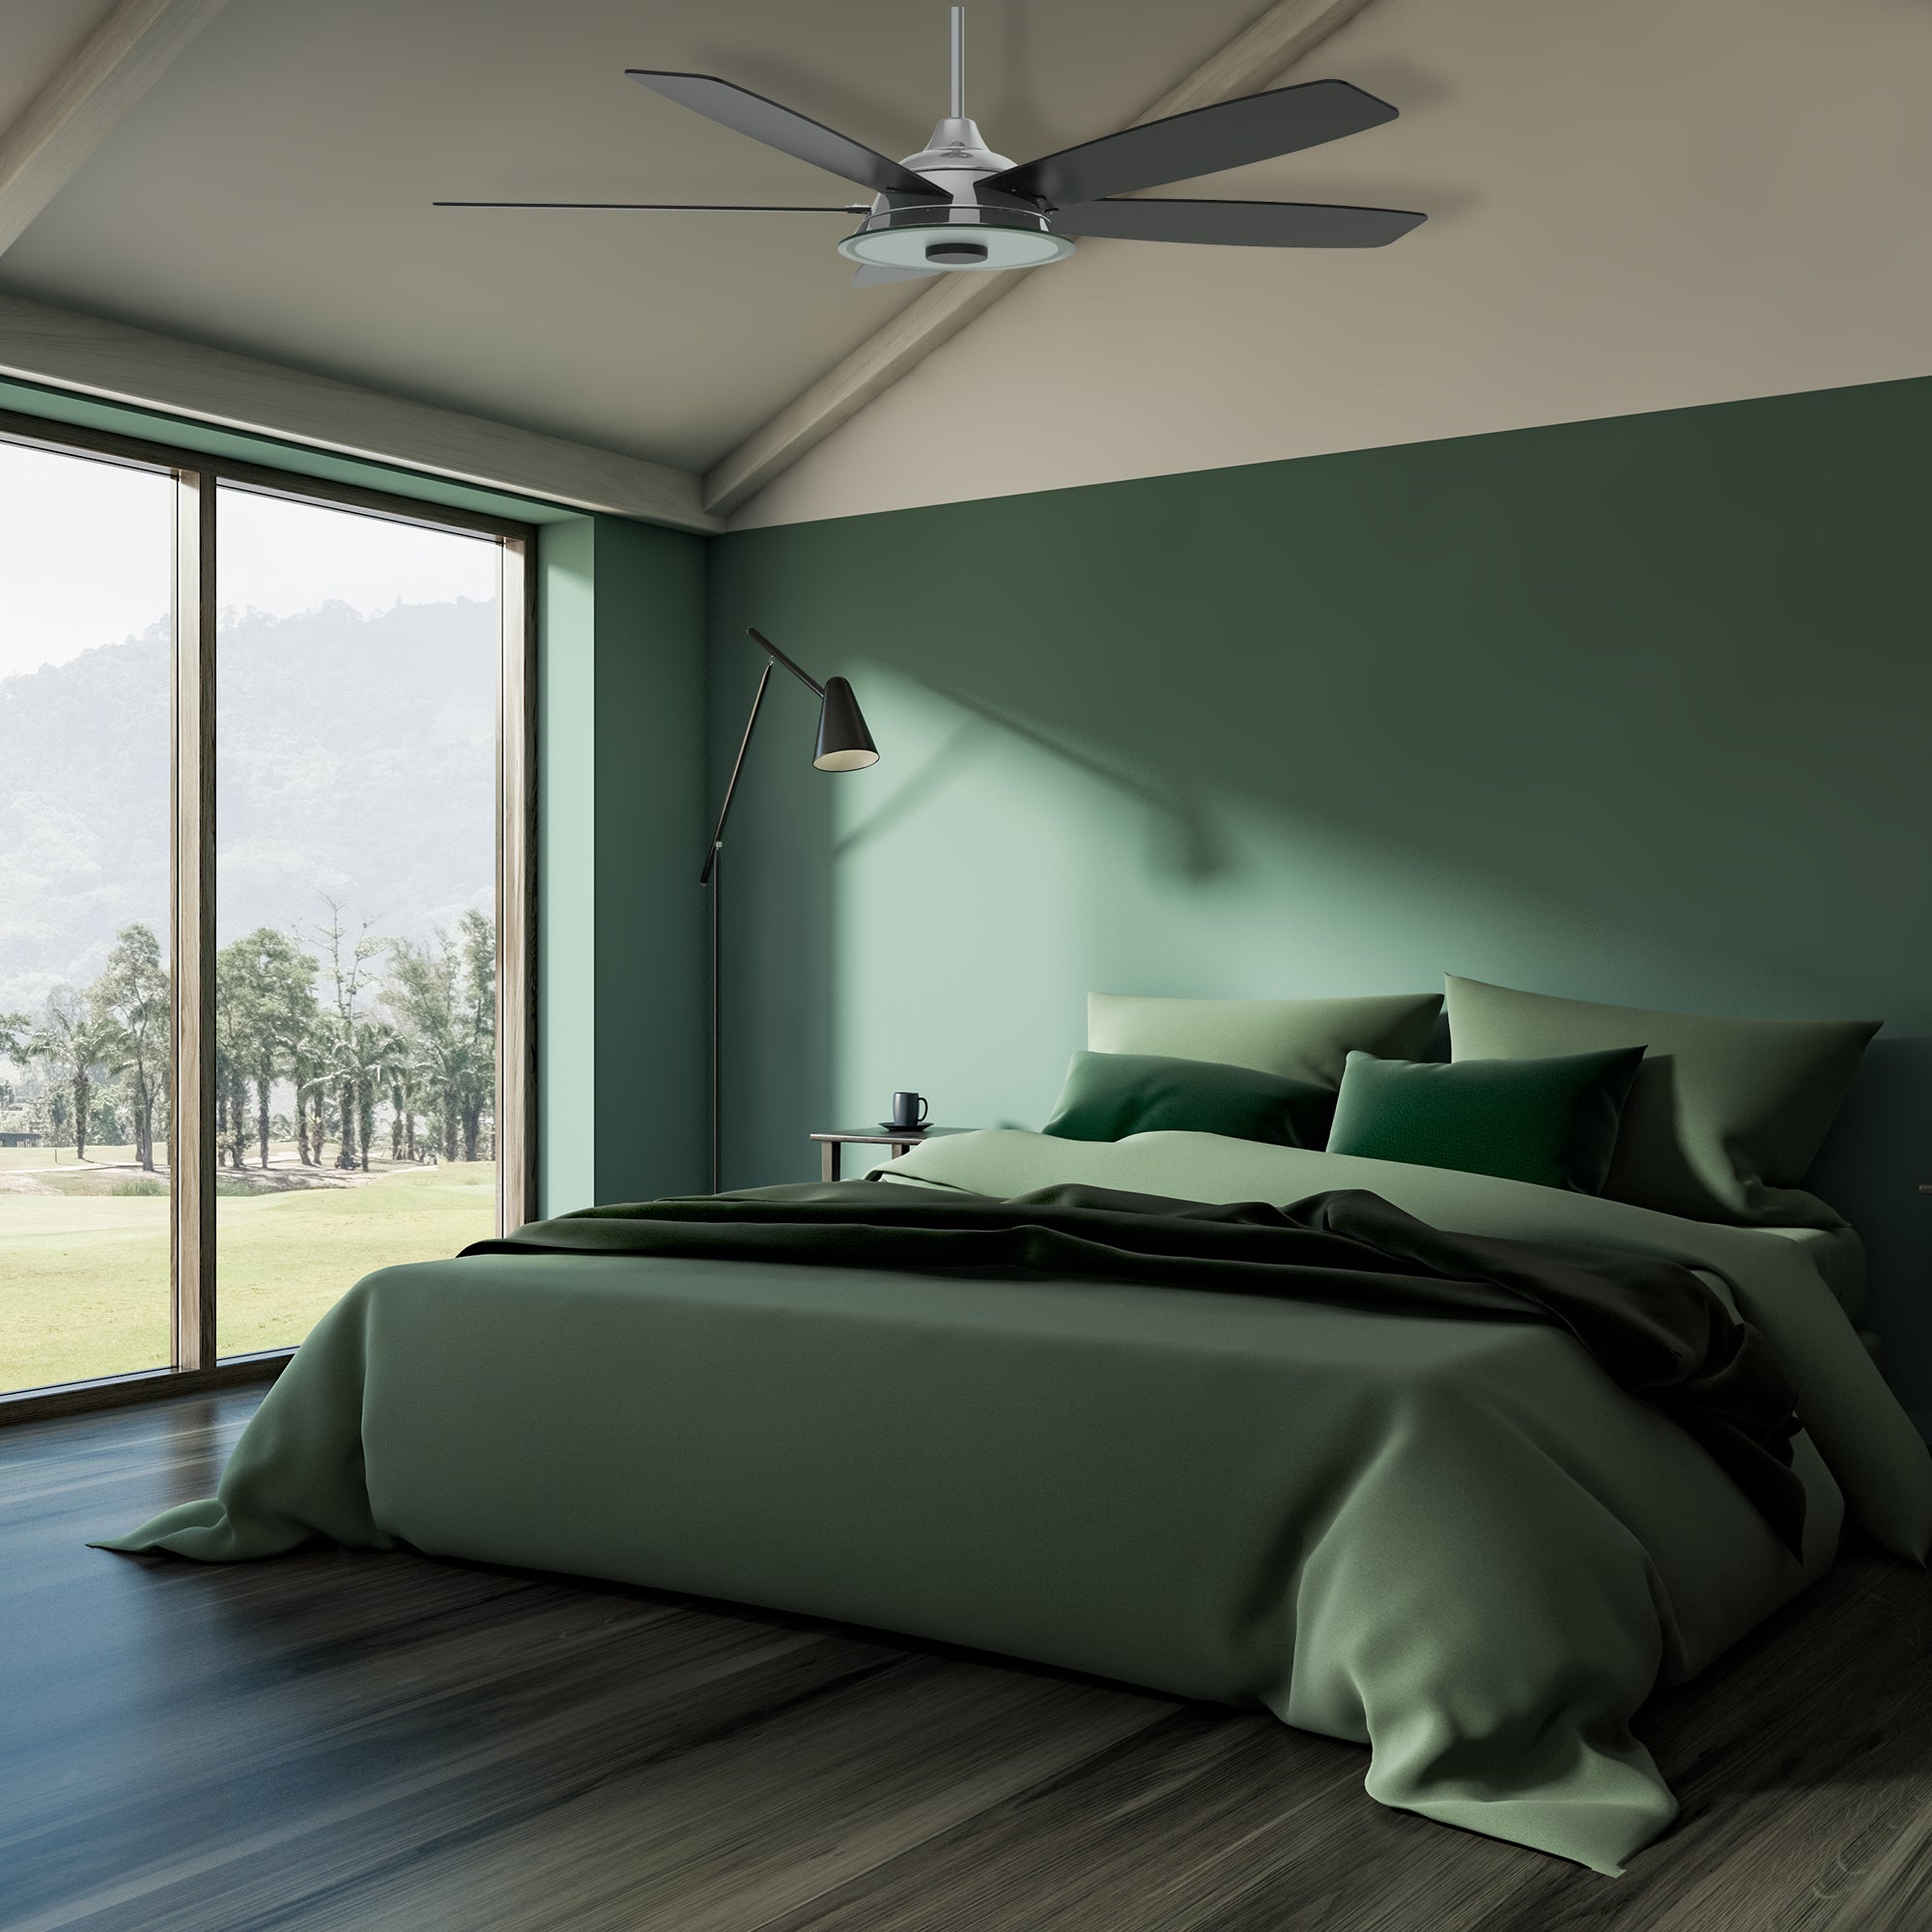 The Smafan Striker 56&#39;&#39; Smart Fan will blend beautifully in any décor trend. Five different airfoil color options, dimmable Led light perfectly matches your space. Compatible with Amazon Alexa and Google Assistant and Siri, Striker helps you control your fan with the phone app, remote, and voice command.